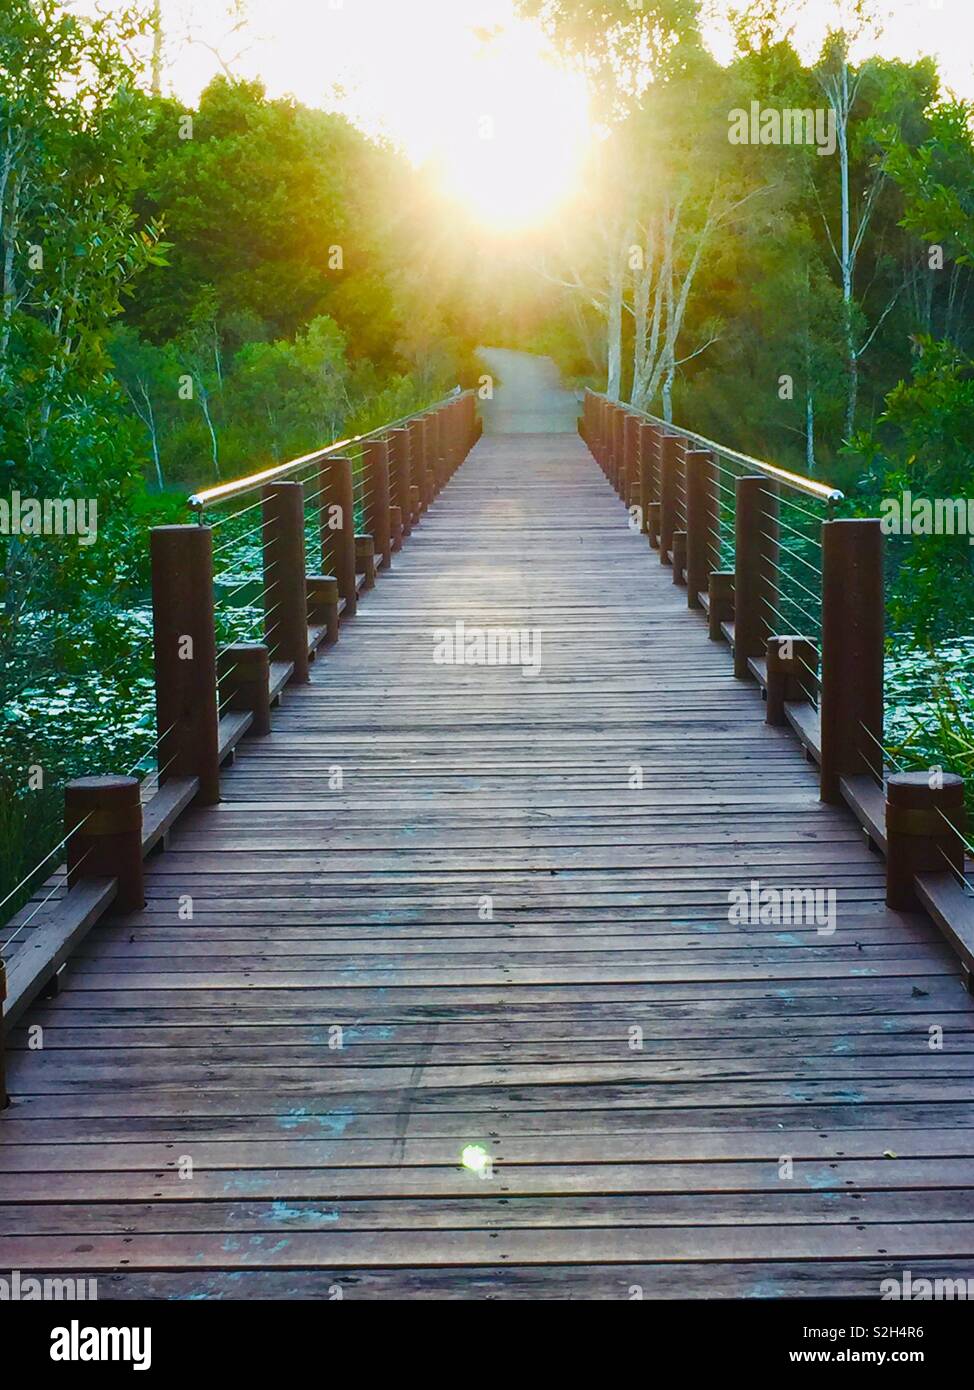 The view from this small bridge walkway over the lake shows the glowing sun. Stock Photo